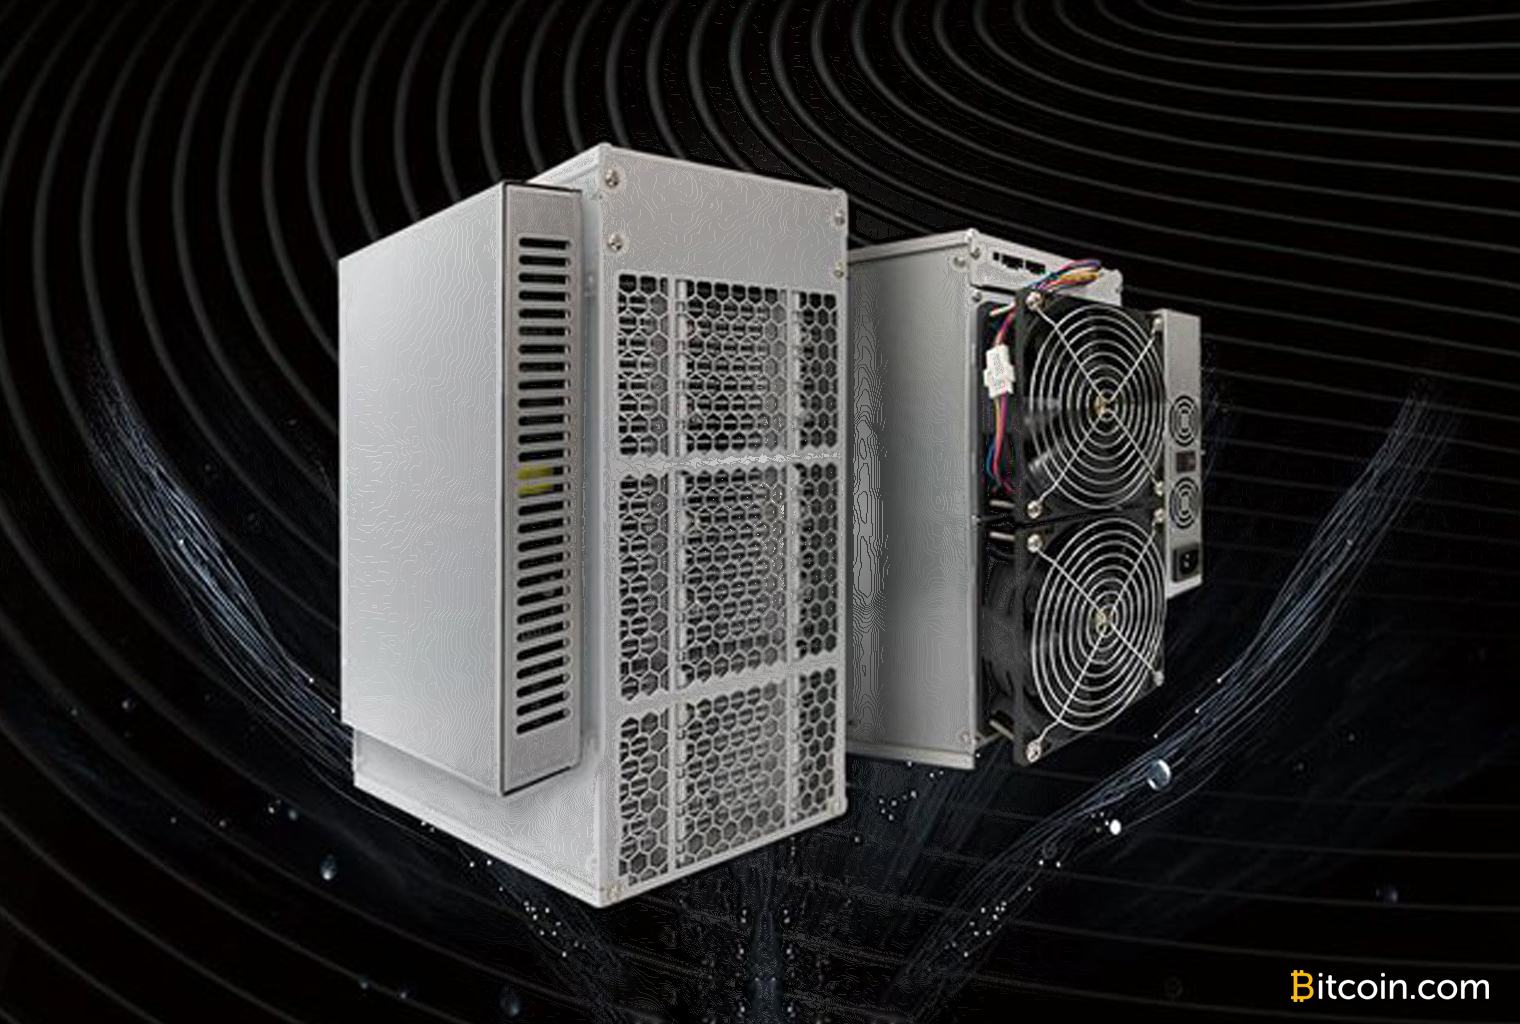 Manufacturing Giants Bitmain and Canaan Announce Second-Generation Miners